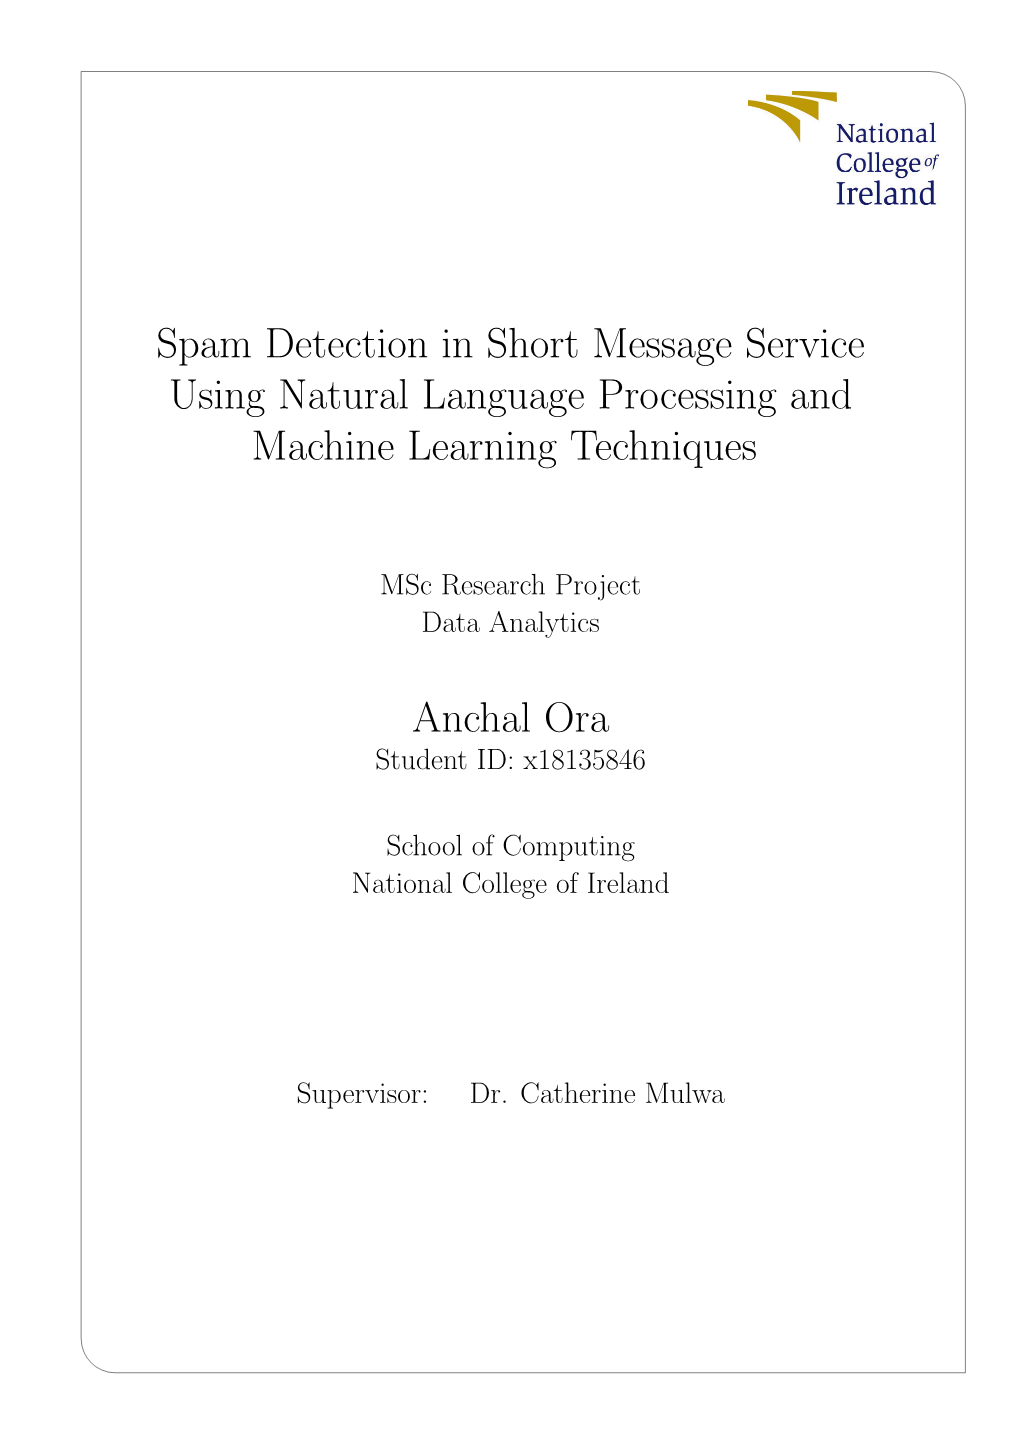 Spam Detection in Short Message Service Using Natural Language Processing and Machine Learning Techniques